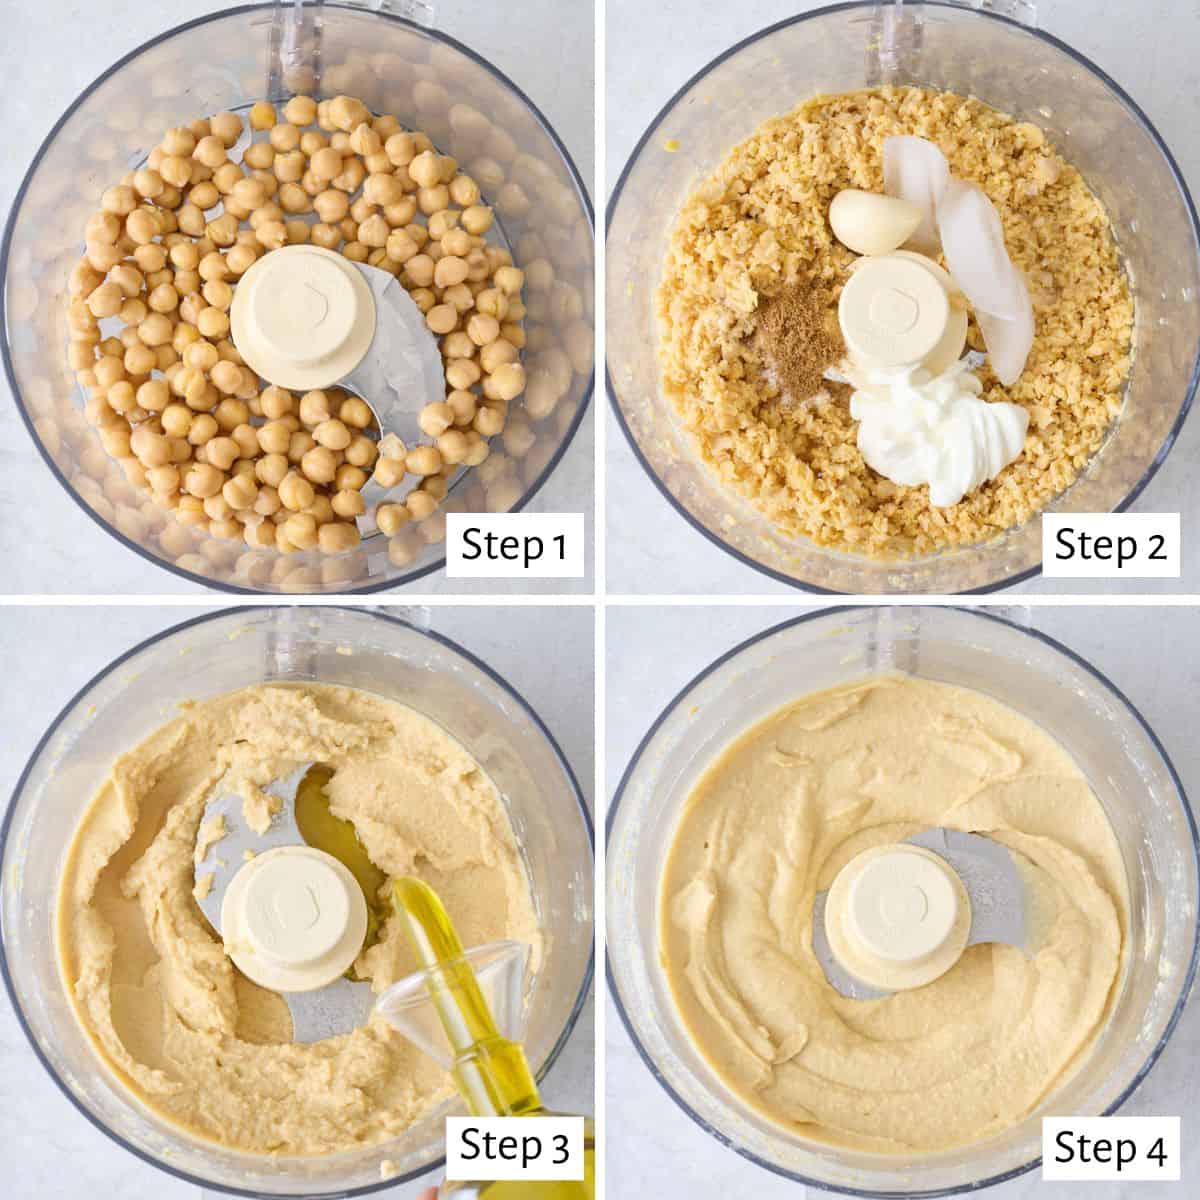 4-image collage making recipe: 1 - Rinsed and dried canned chickpeas in a food processor; 2 - After processing into breadcrumb-like texture with lemon juice, yogurt, garlic, salt, cumin, and ice cubes added; 3 - After processing with oil being drizzled in from above; 4 - After blended smooth.